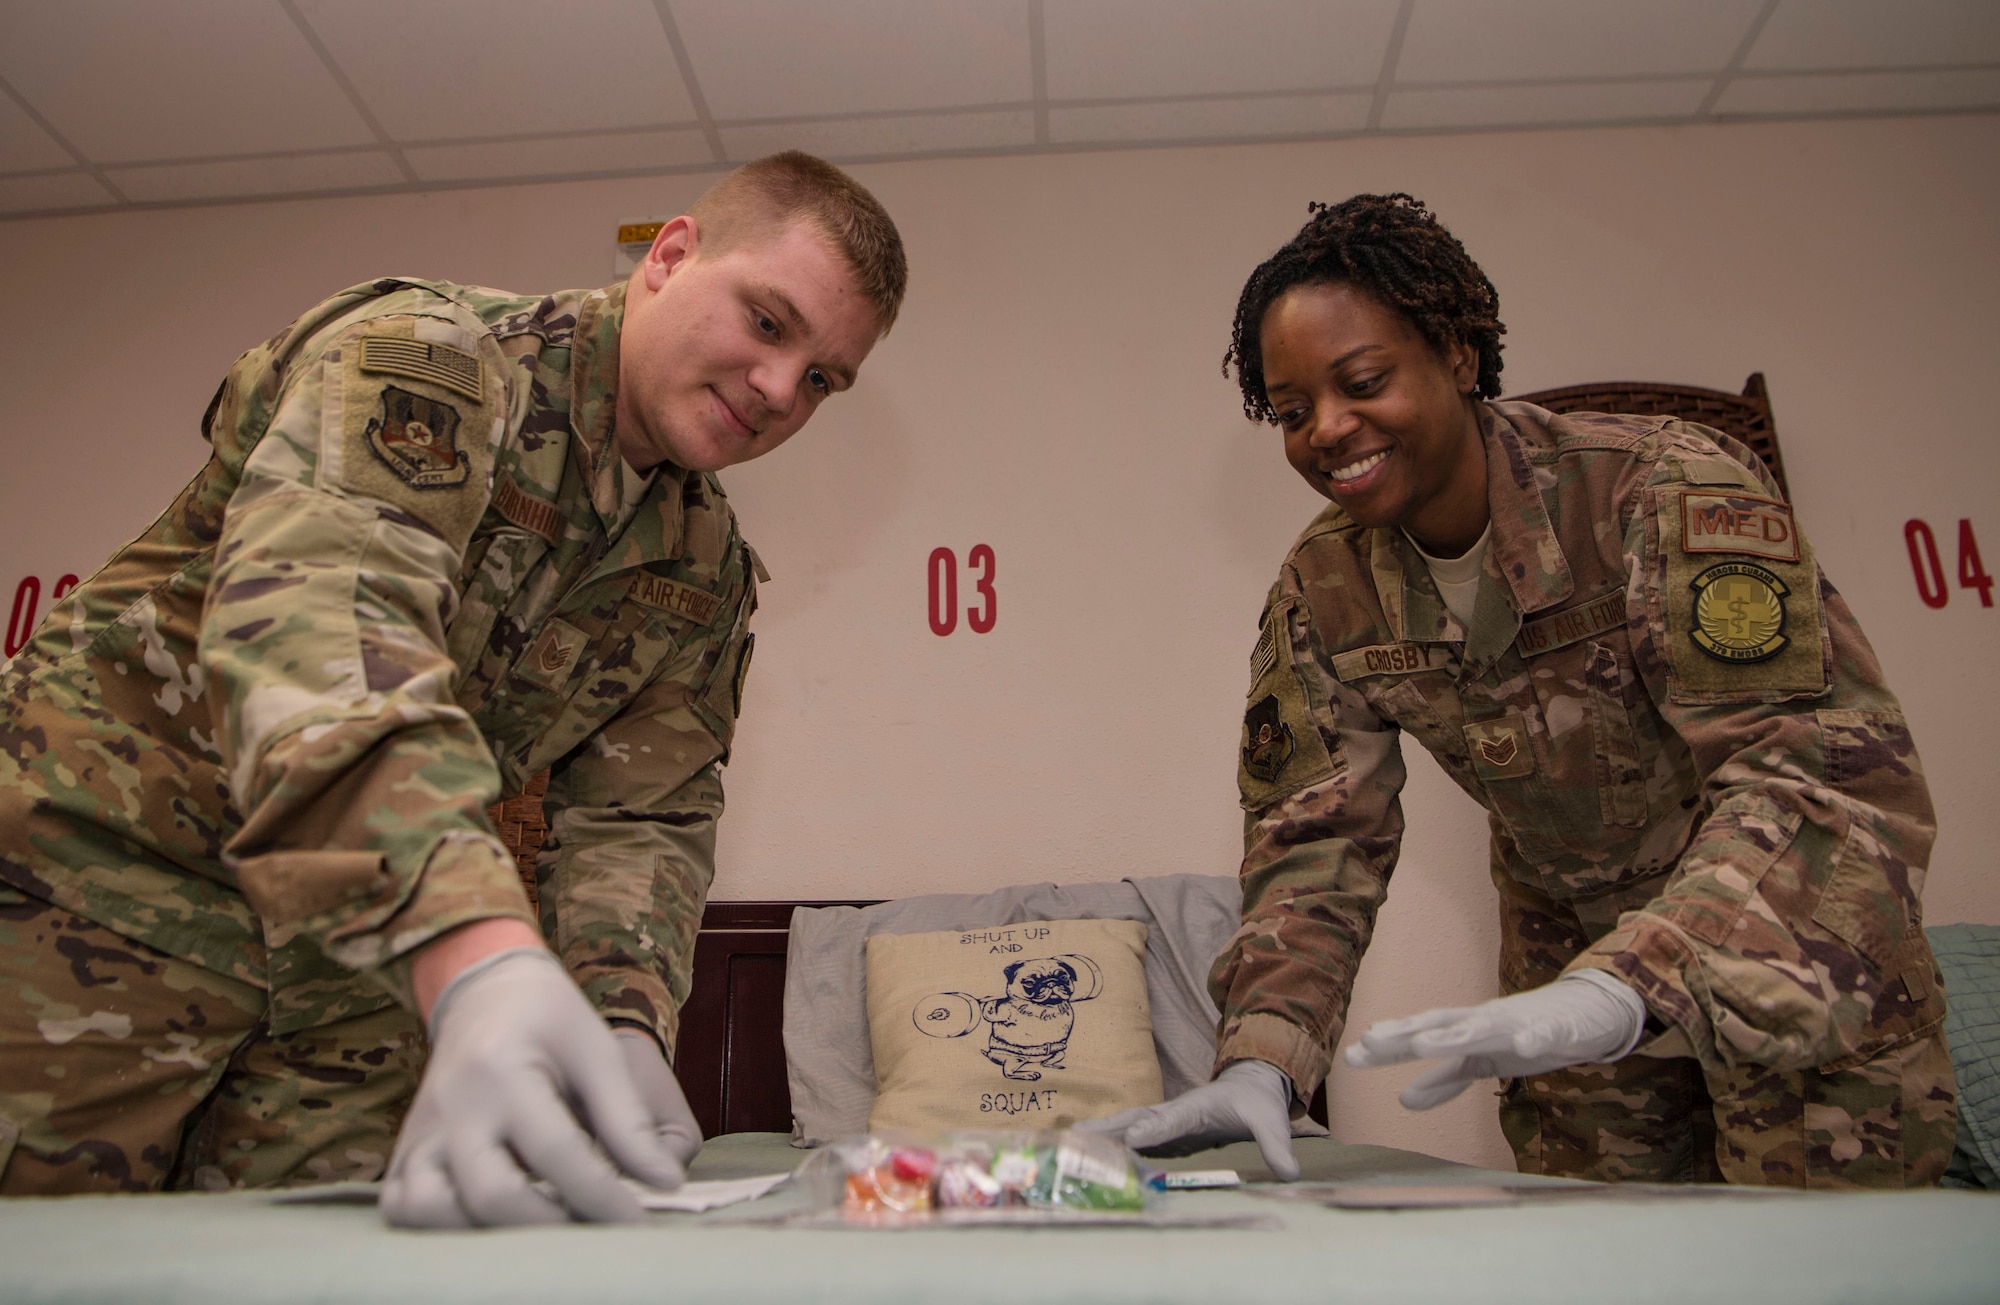 Tech. Sgt. Zachary Barnhill, left, 379th Expeditionary Medical Support Squadron (EMDSS) En Route Patient Staging (ERPS) Facility shift supervisor, and Staff Sgt. Erica Crosby, 379th EMDSS ERPS medical technician, set up an inbound patient bed Feb. 27, 2019, at Al Udeid Air Base, Qatar. Airmen at the 379th EMDSS’s ERPS facility work at both the clinic and on the flightline to ensure safe transport and care is provided to in-transit patients during their stay at Al Udeid before they are moved to locations supporting higher levels of medical treatment, if necessary. (U.S. Air Force photo by Tech. Sgt. Christopher Hubenthal)